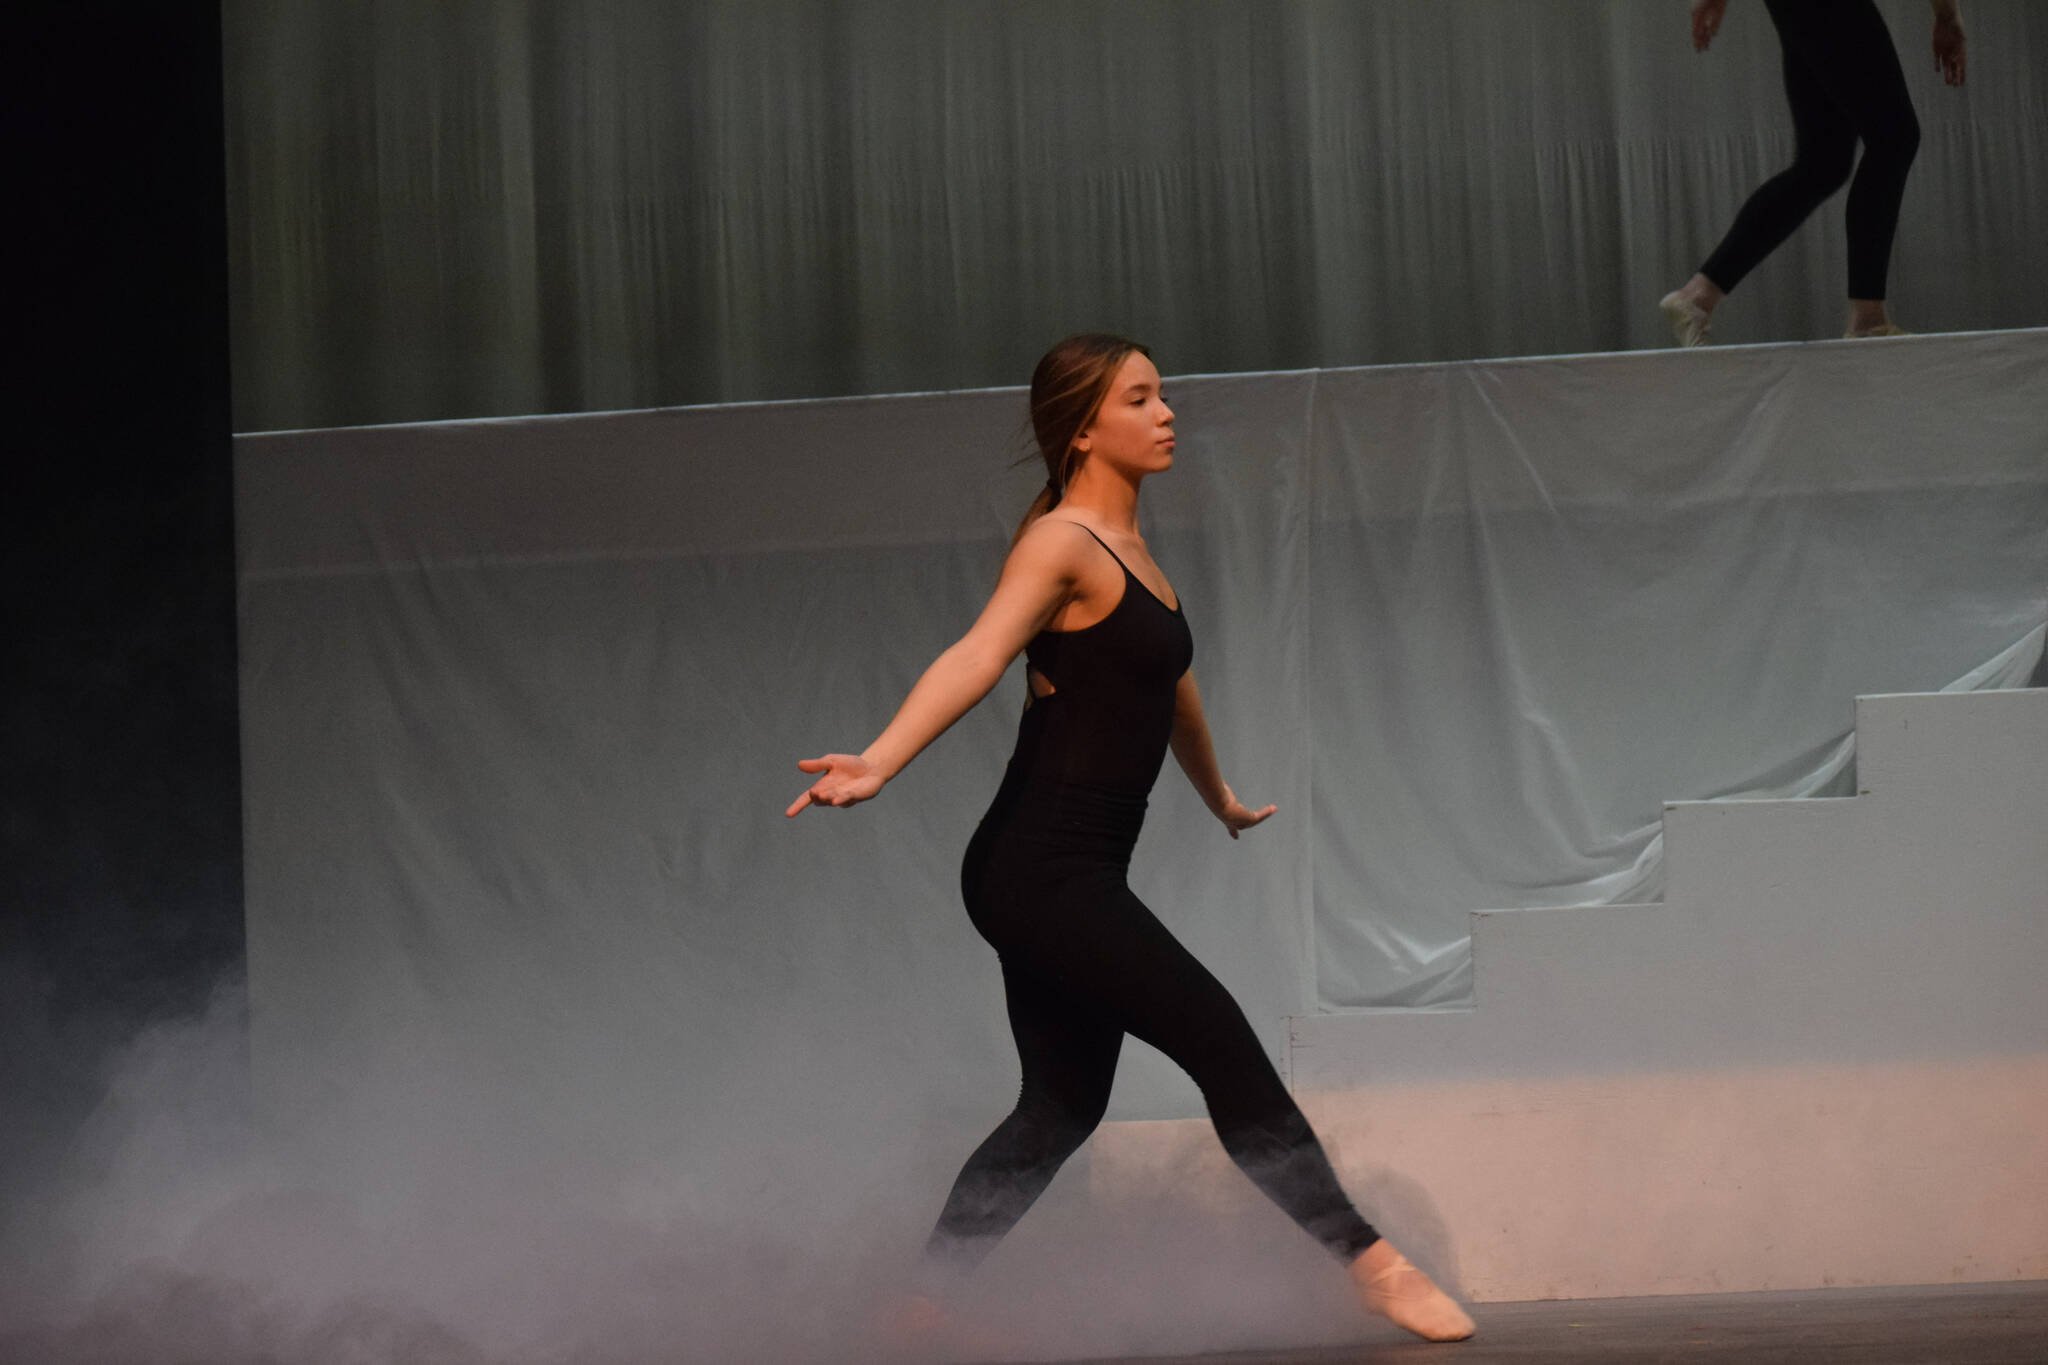 Isabella Valenzuela prepares for the Forever Dance company showcase “Among Dreams” during a rehearsal on Tuesday, March 22, 2022 at the Renee C. Henderson Auditorium in Kenai, Alaska. (Camille Botello/Peninsula Clarion)